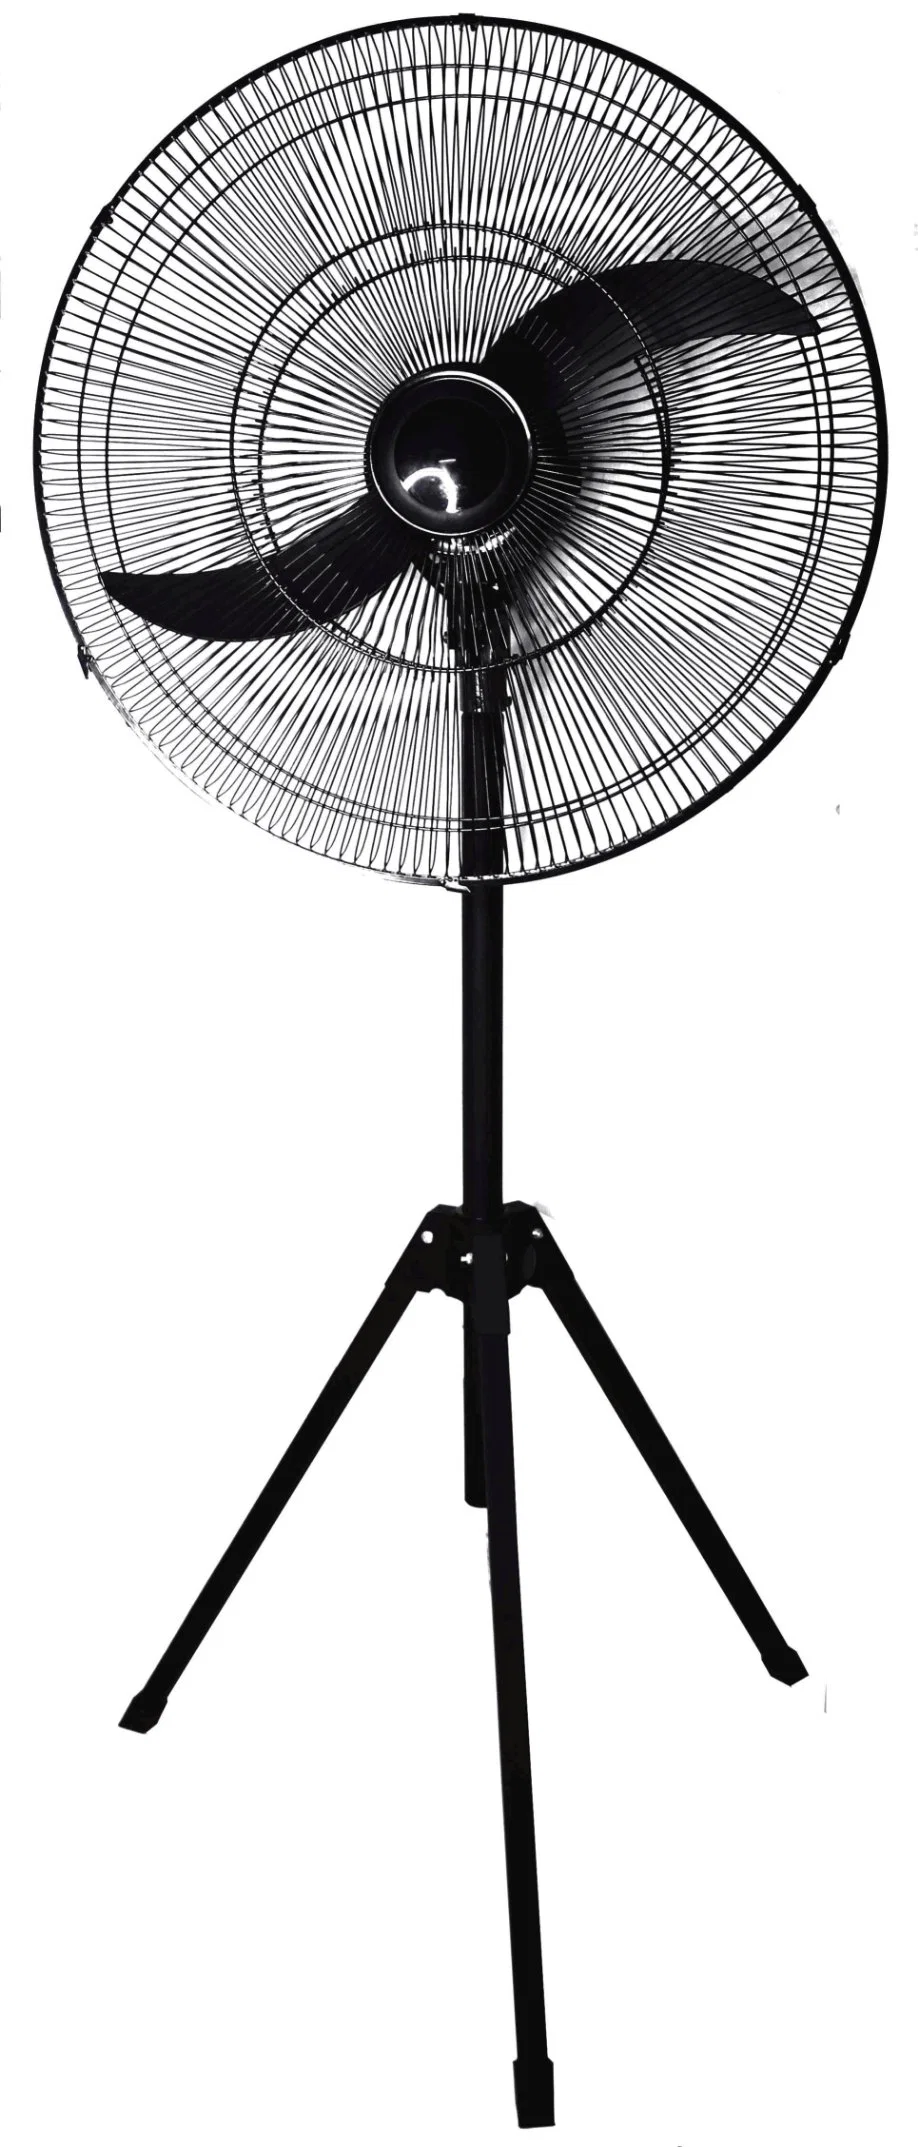 Heavy Duty Commercial Oscillating Industrial Electrical Stand Pedestal Fan